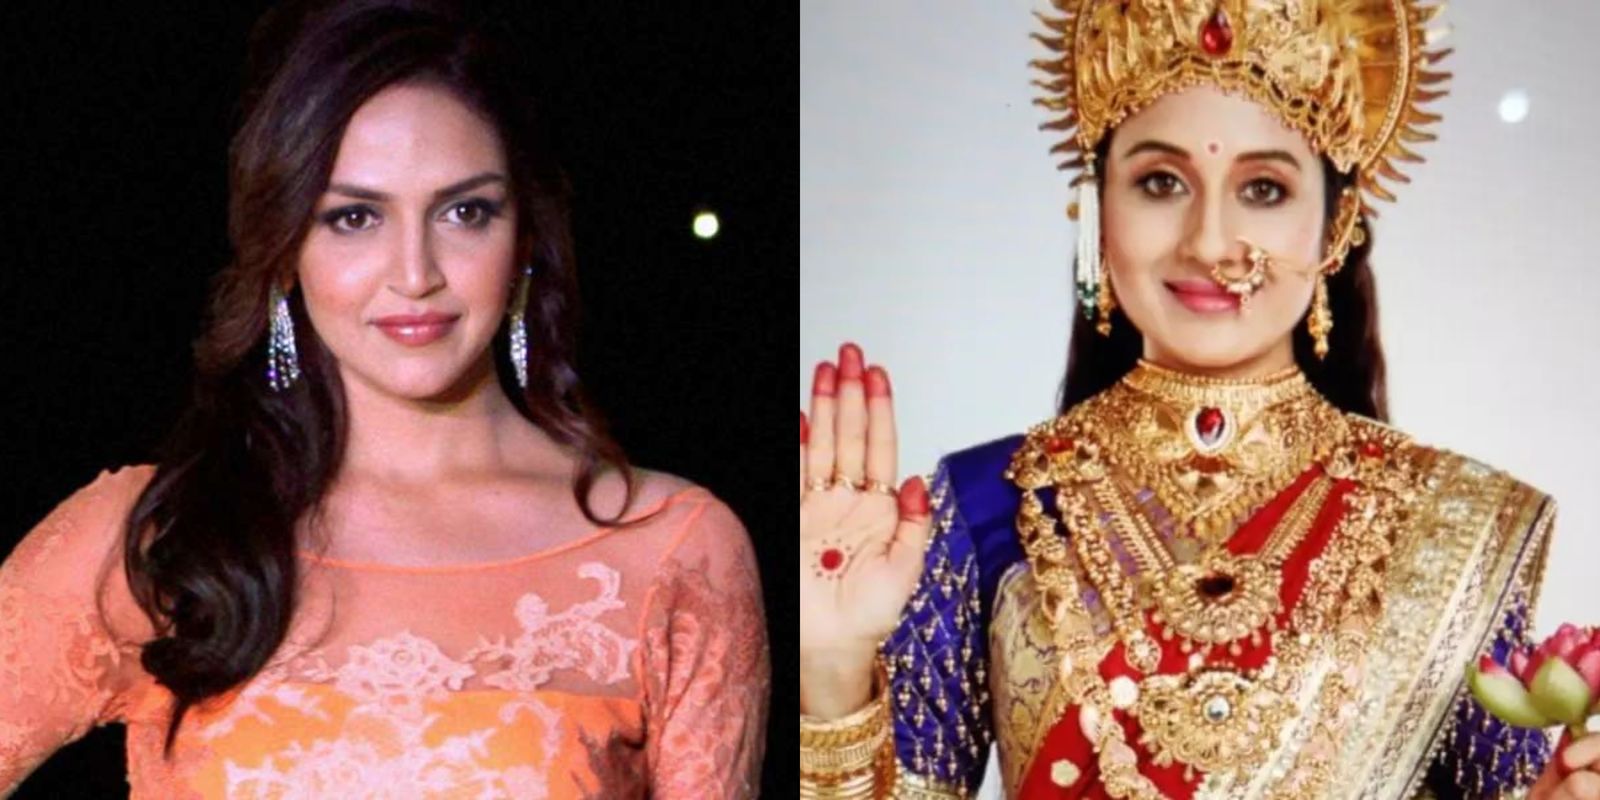 Esha Deol Will Not Be Making Her Television Debut With Jag Janani Maa Vaishno Devi